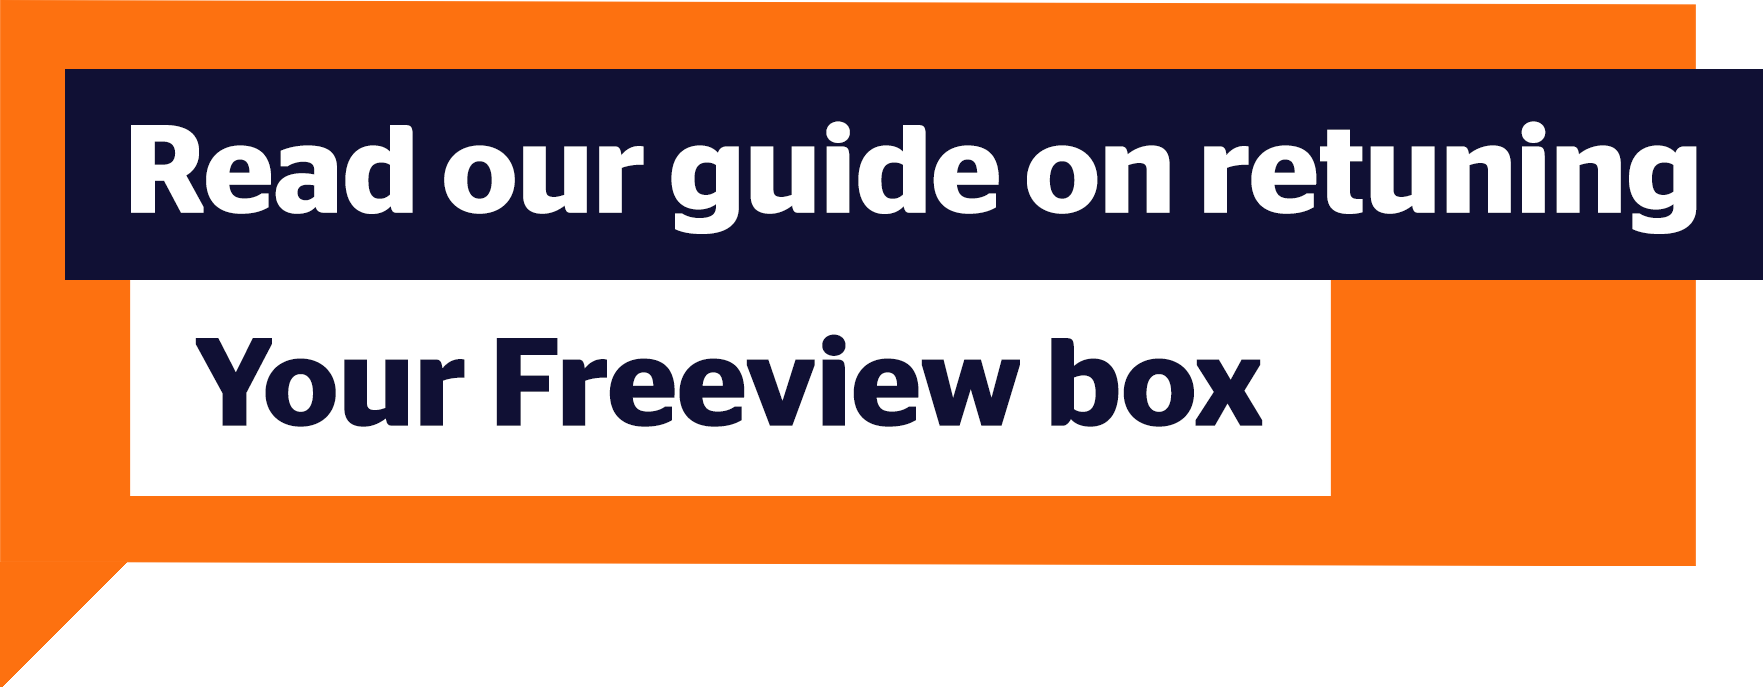 Retune your freeivew box: https://www.togethertv.com/blog/important-update-freeview-viewers-changes-together-tv-coverage-29th-june-2022